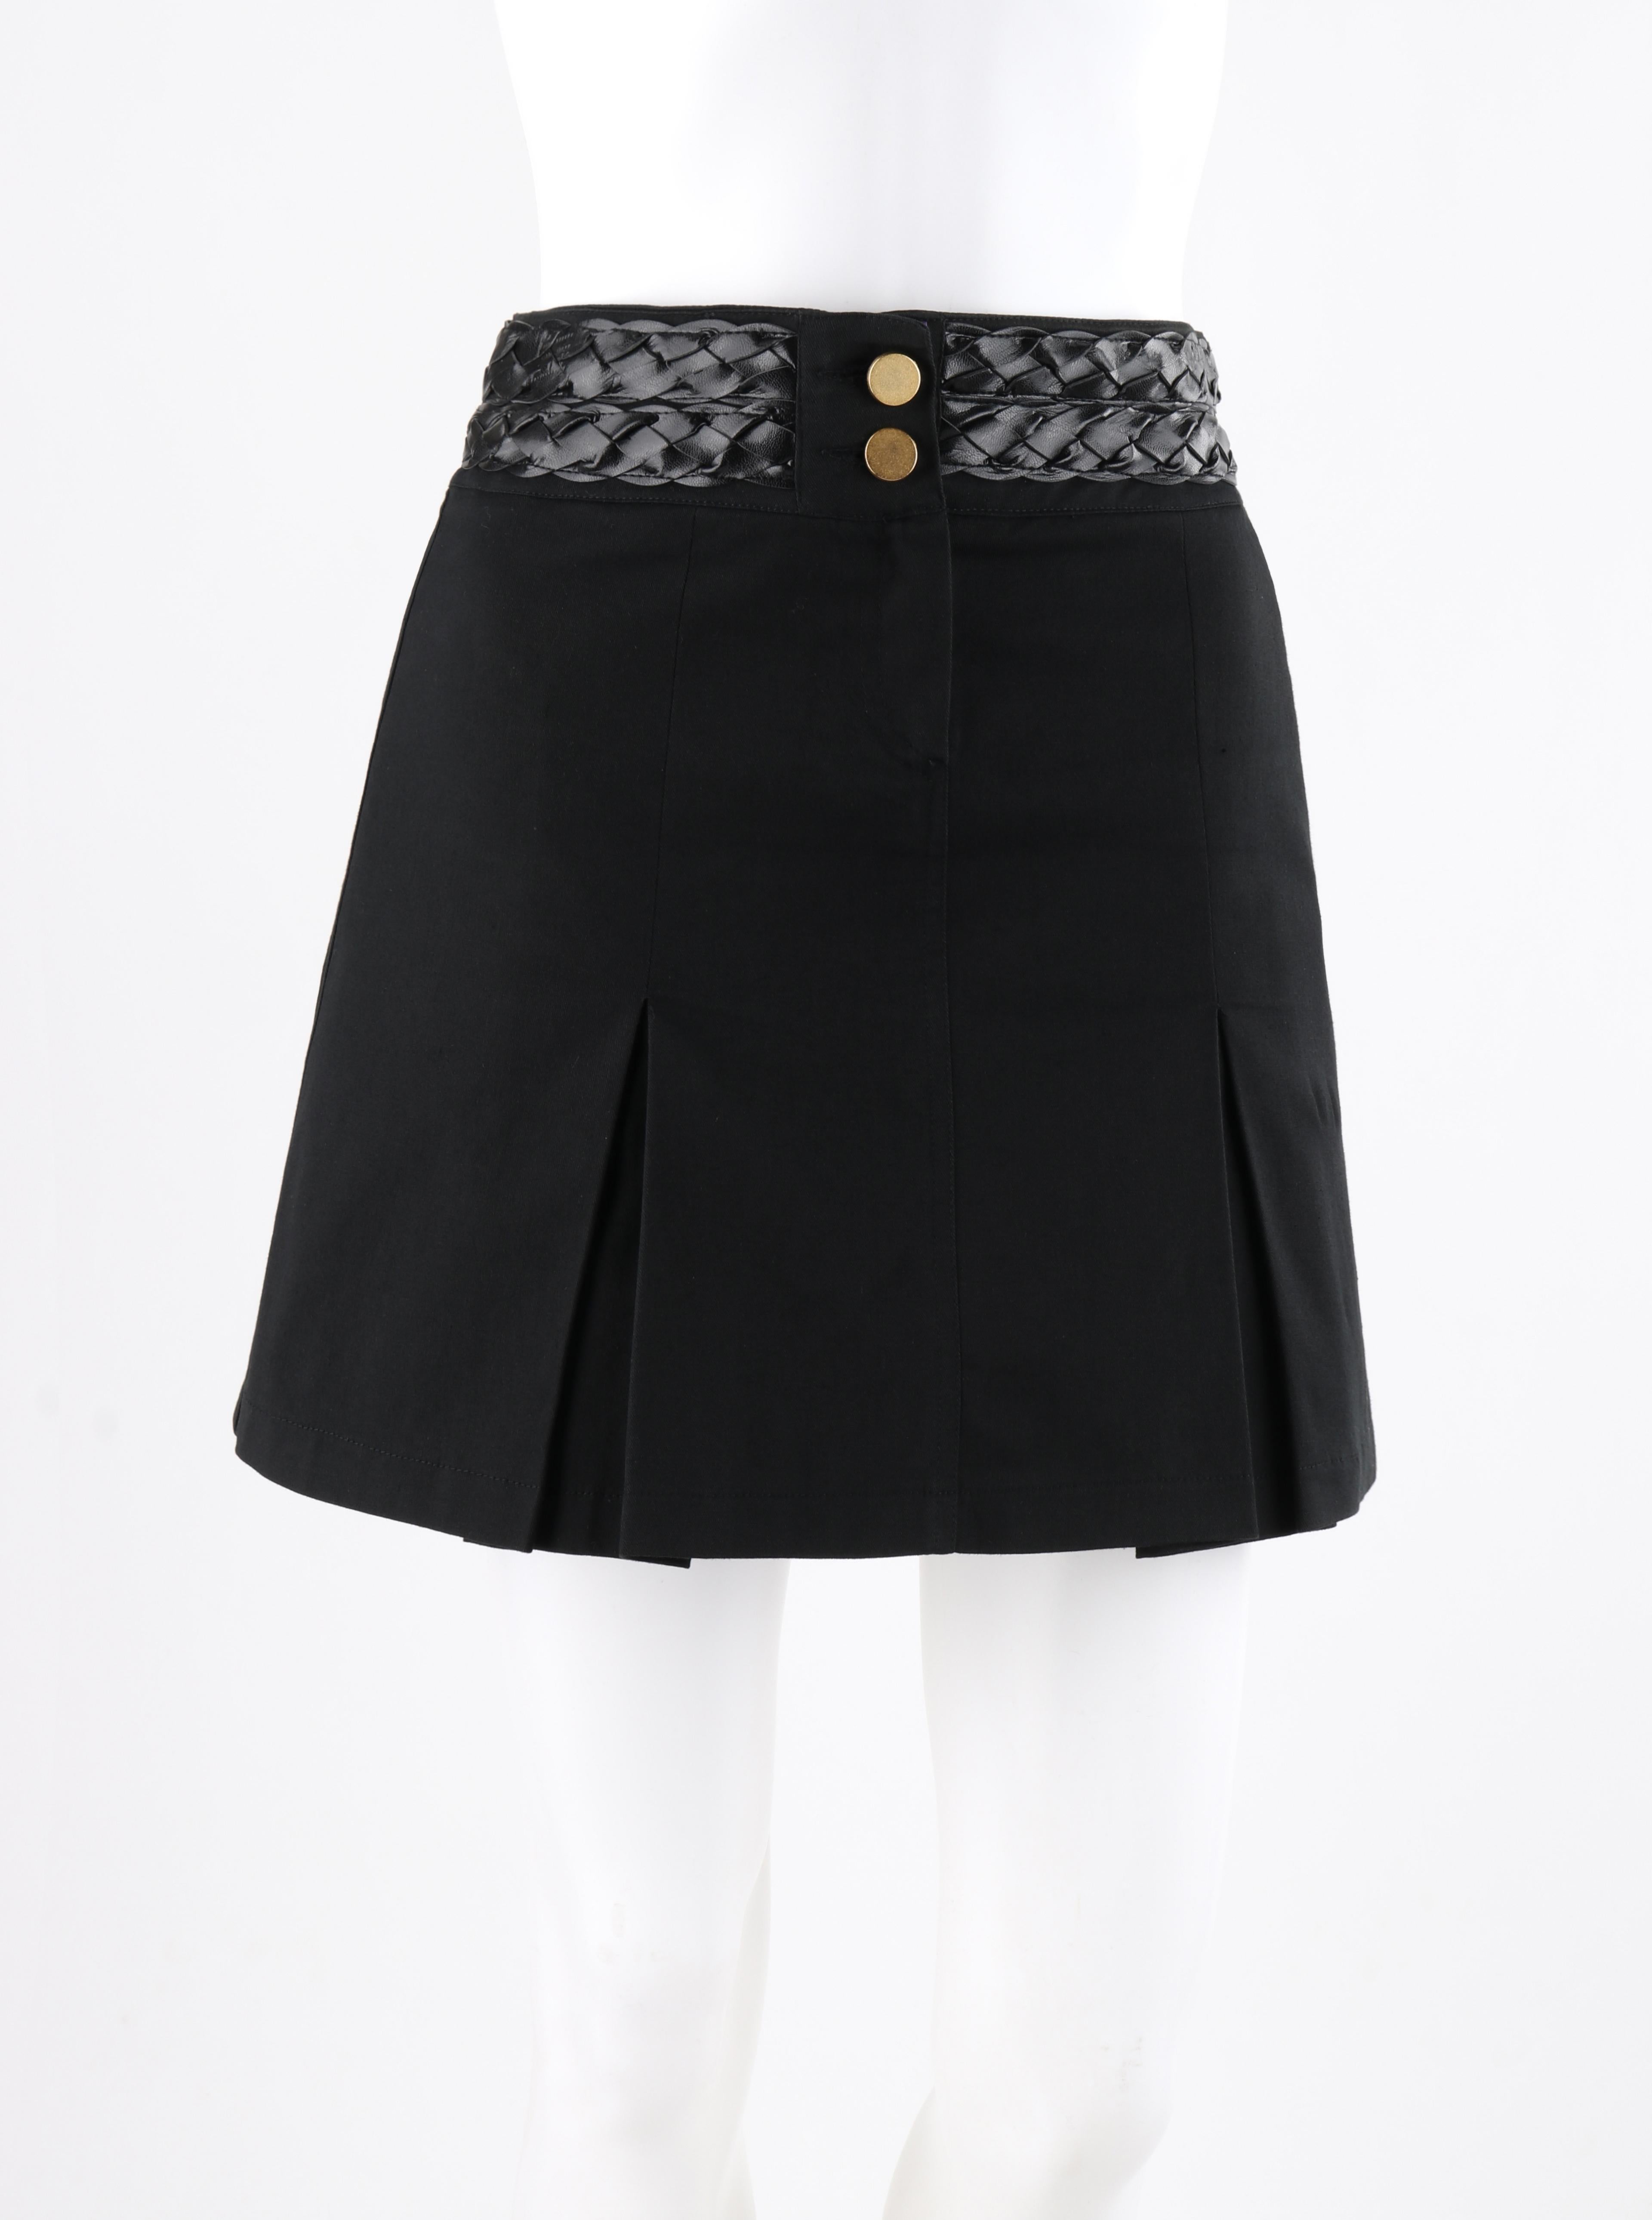 ALEXANDER McQUEEN A/W 1996 “Dante” Black Leather Braid Pleated Mini Skirt

Brand / Manufacturer: Alexander McQueen
Collection: A/W 1996 “Dante”
Designer: Alexander McQueen
Style: Pleated mini skirt
Color(s): Black
Lined: No
Marked Fabric Content: